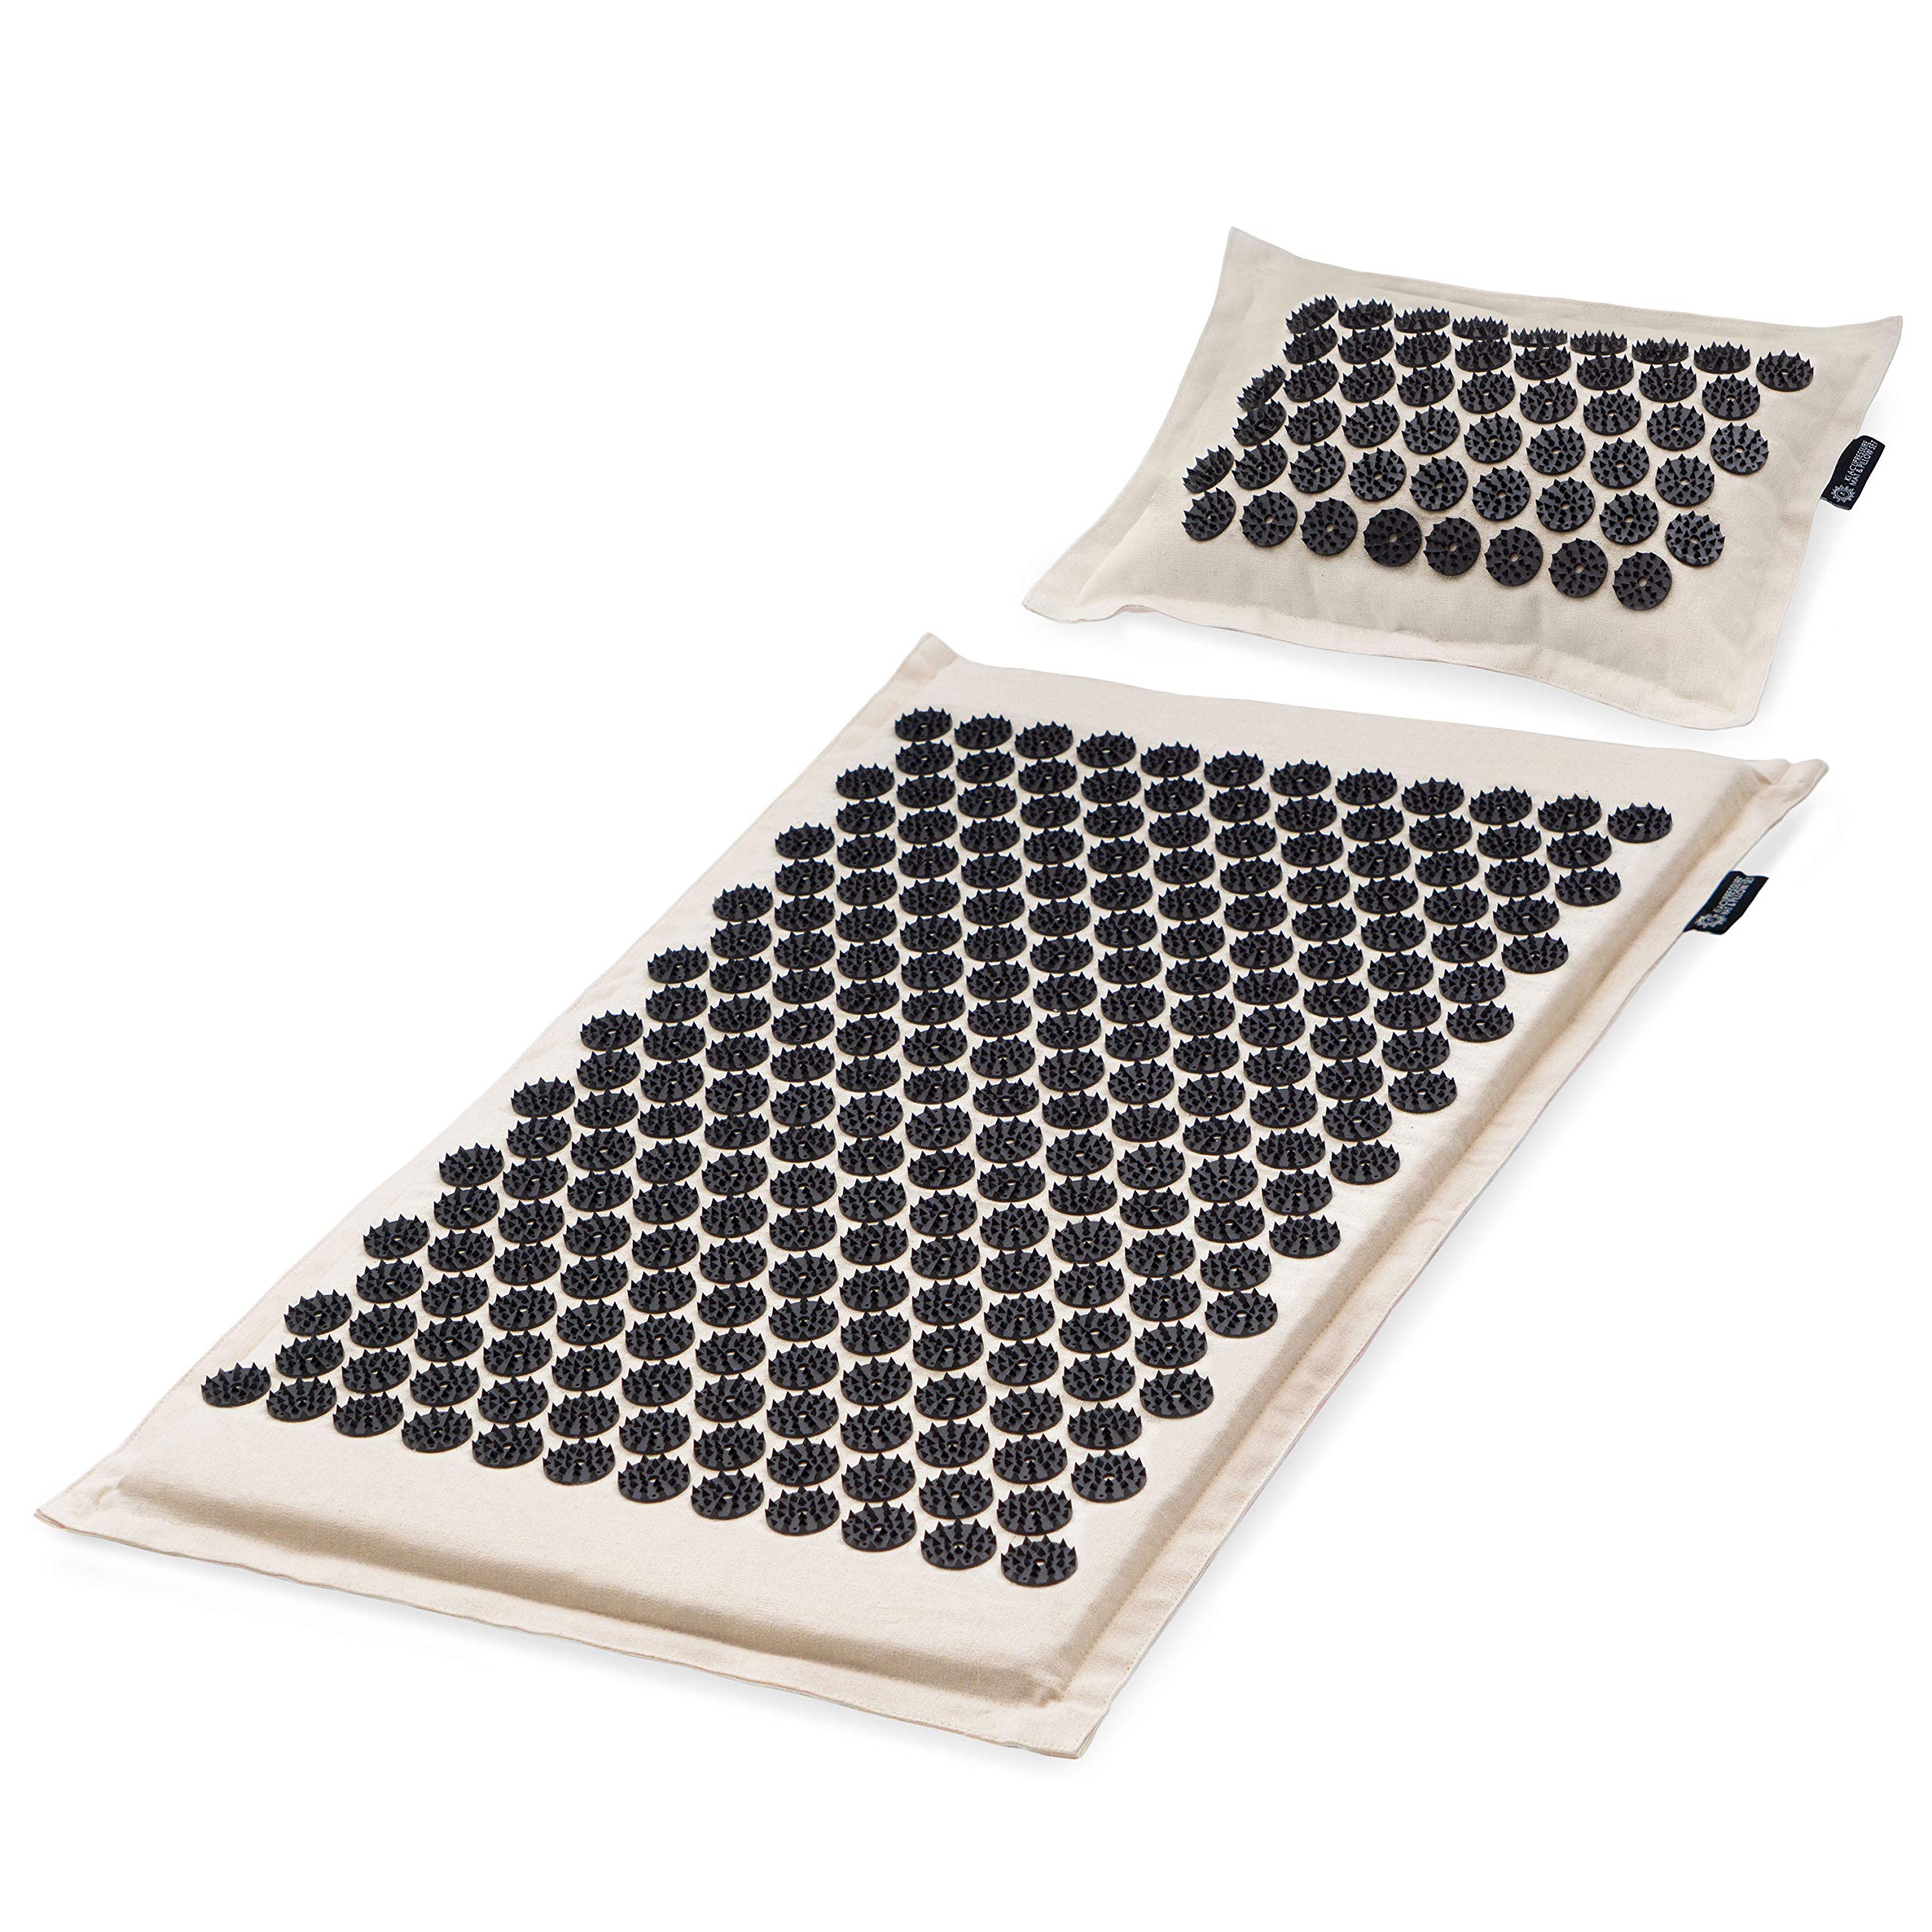 ProsourceFit Ki Acupressure Mat and Pillow Set with 100% Natural Linen for Back/Neck Pain Relief and Muscle Relaxation